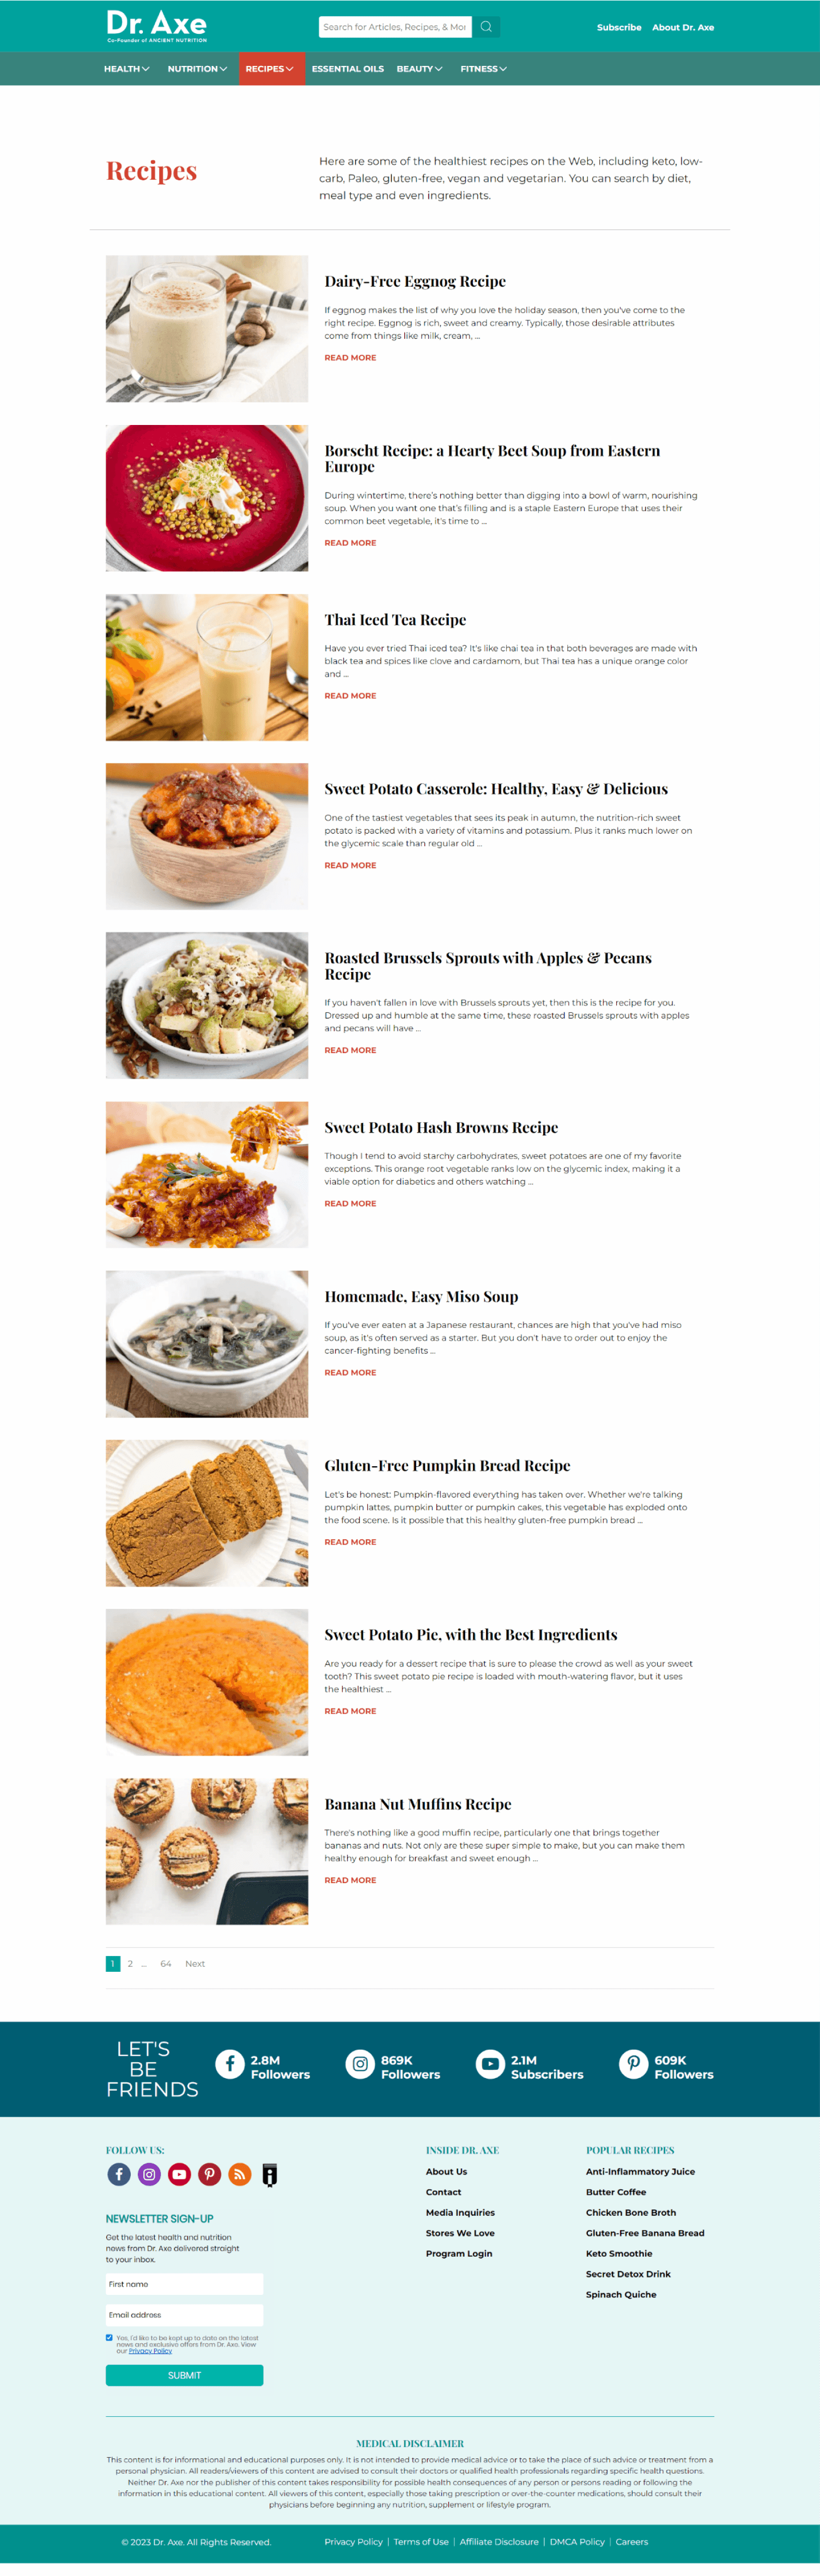 PDP - Recipe Page